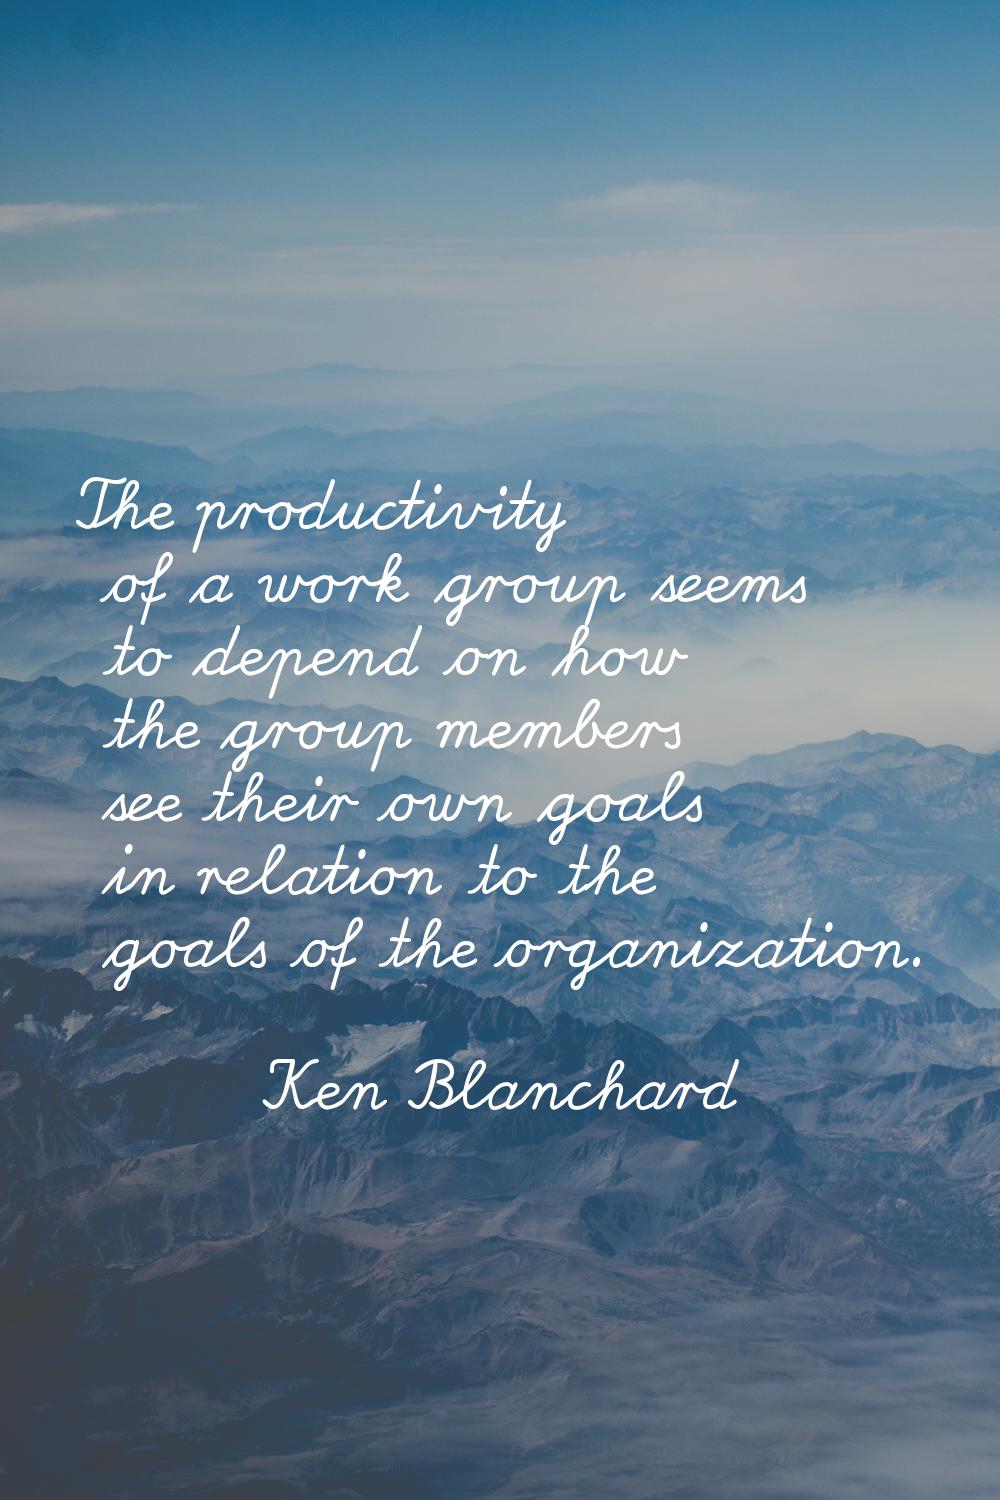 The productivity of a work group seems to depend on how the group members see their own goals in re